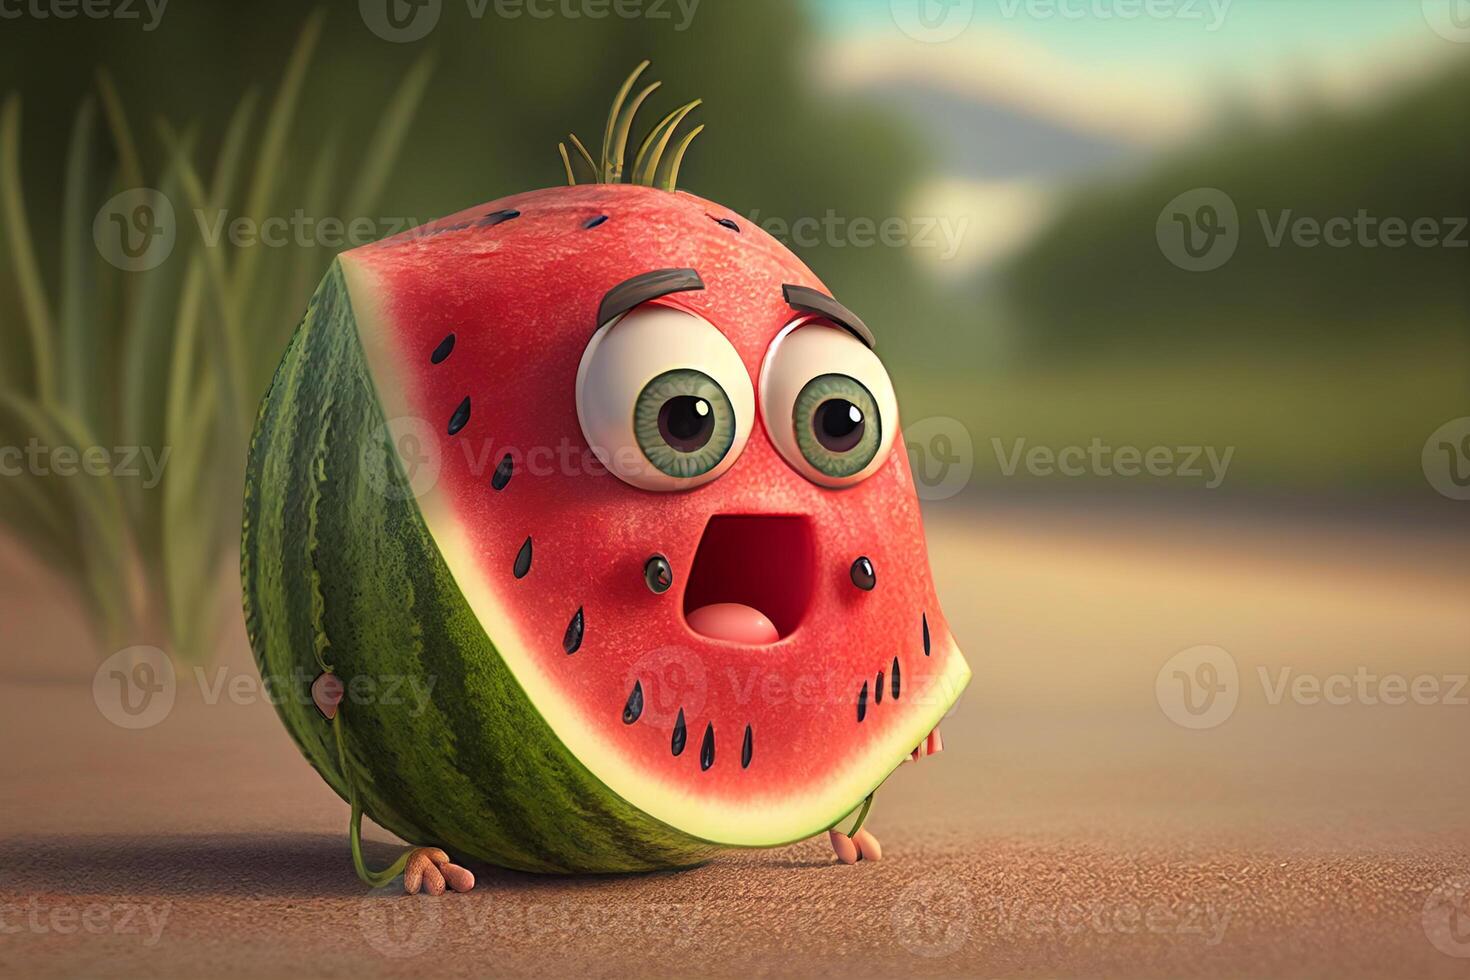 Funny watermelon character with big eyes photo